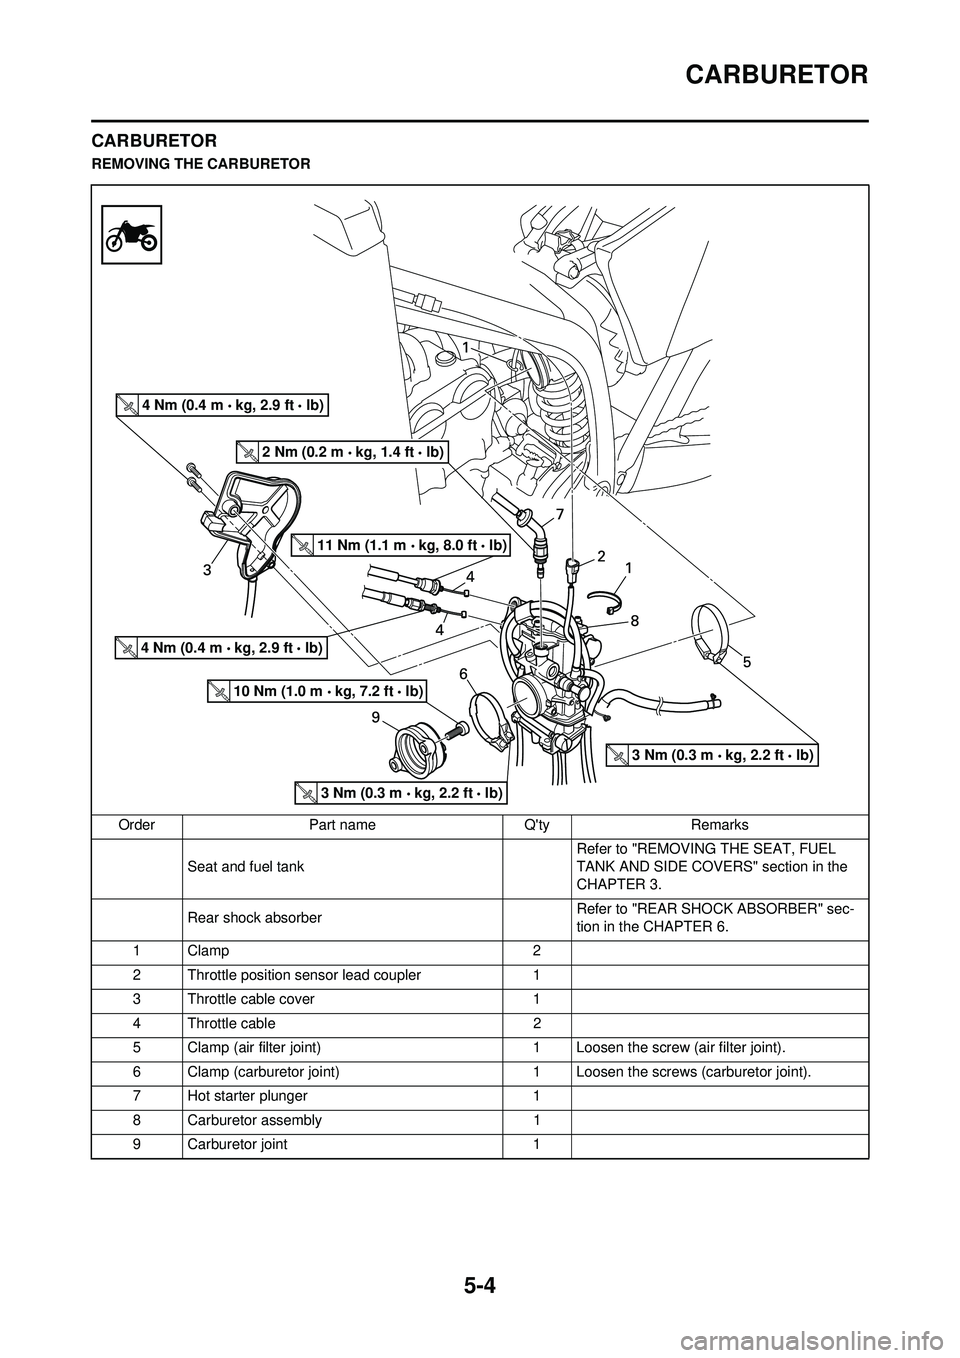 YAMAHA WR 250F 2009  Owners Manual 5-4
CARBURETOR
CARBURETOR
REMOVING THE CARBURETOROrder Part name Qty Remarks Seat and fuel tank  Refer to "REMOVING THE SEAT, FUEL 
TANK AND SIDE COVERS" section in the 
CHAPTER 3.
Rear shock absorbe